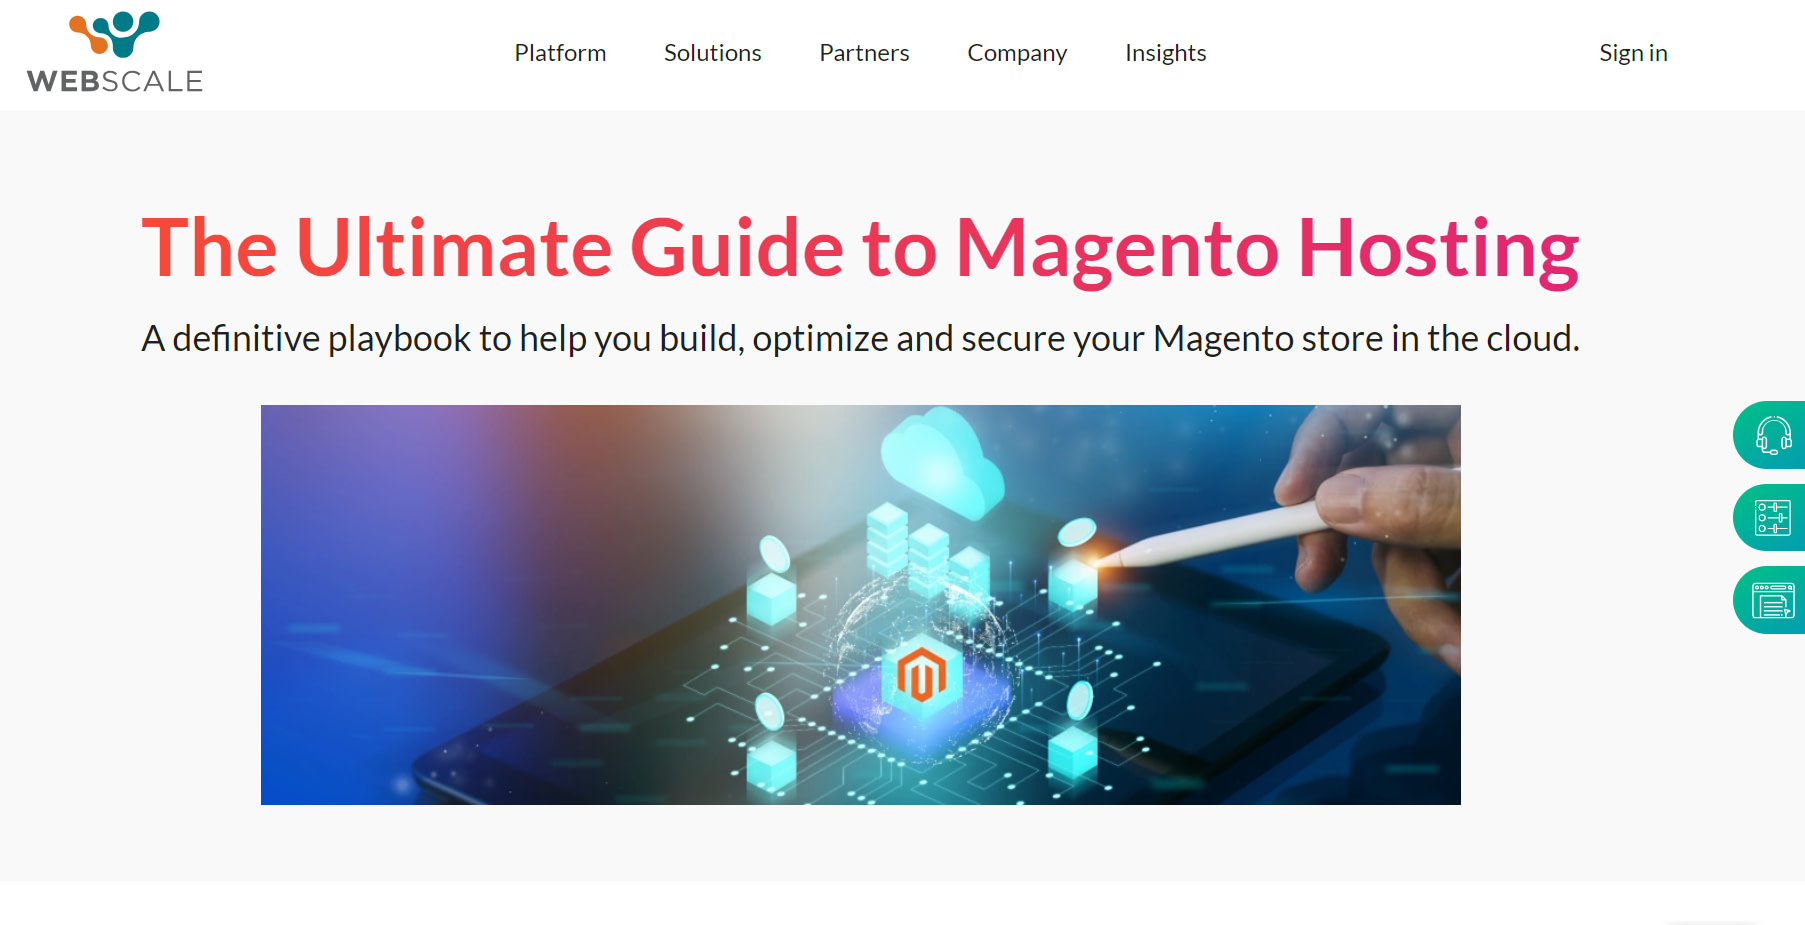 Web Scale is one of the best Magento hosting providers